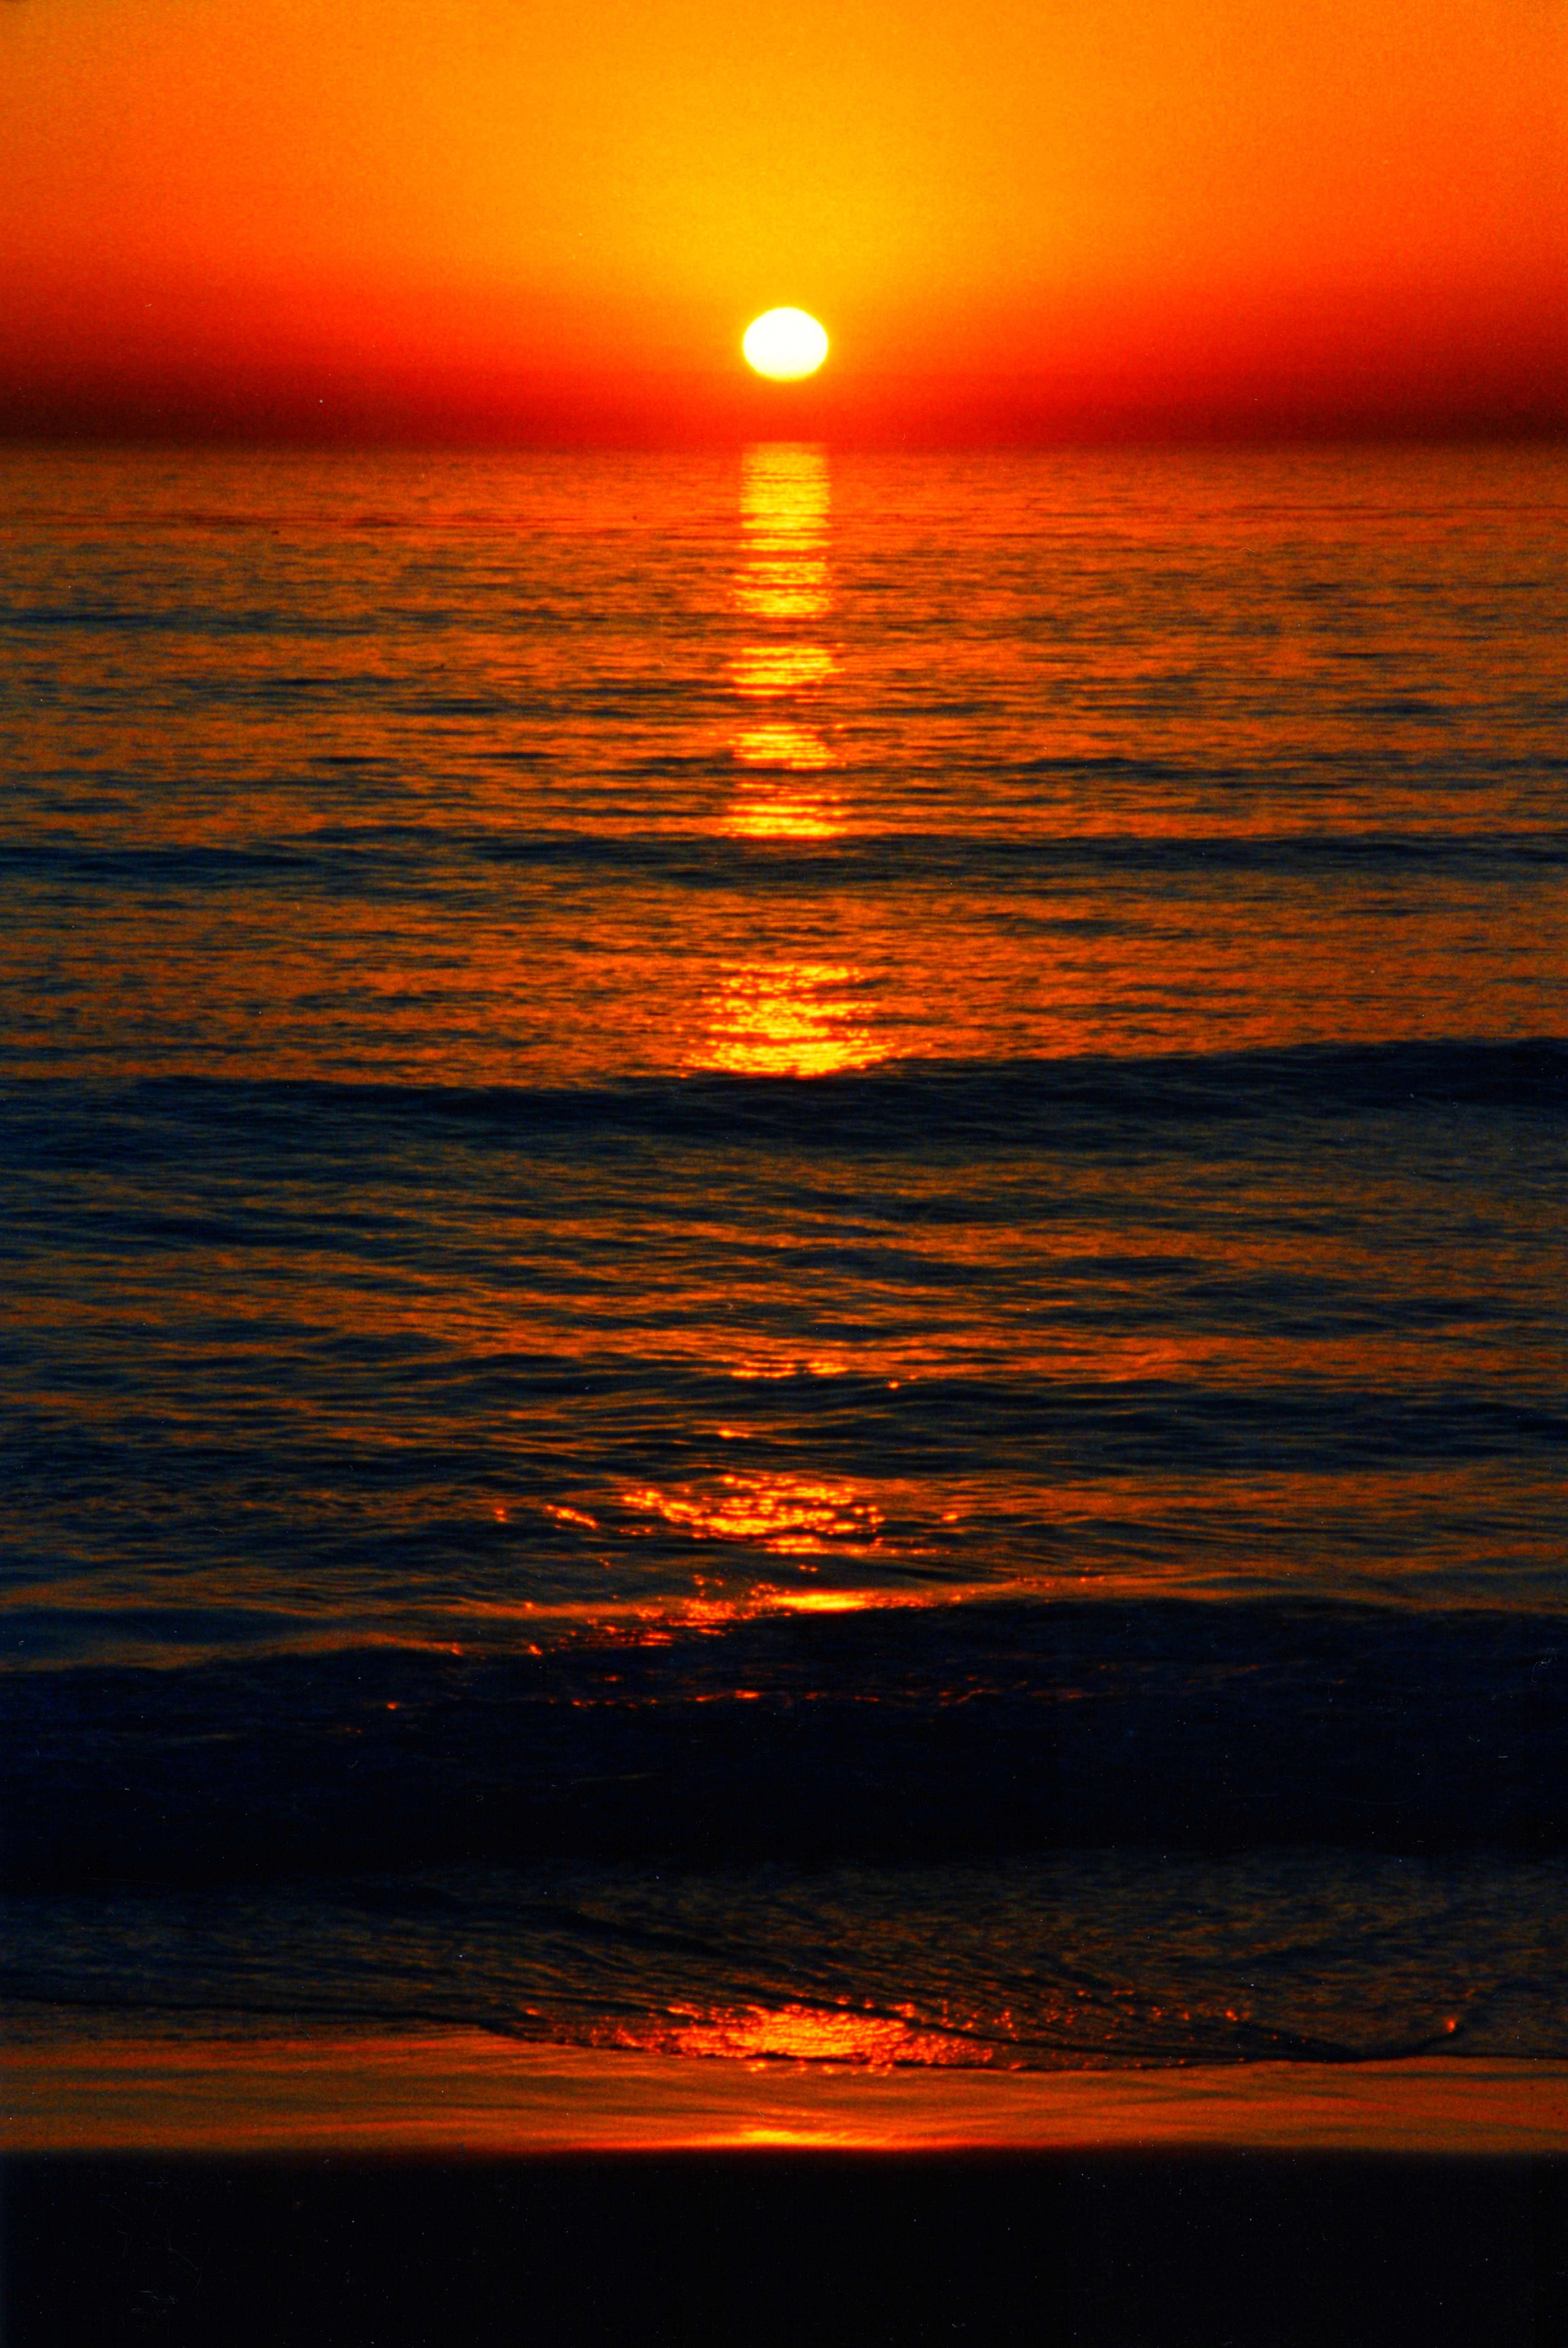  Sunset  over the Ocean  Seascape in San Diego California 